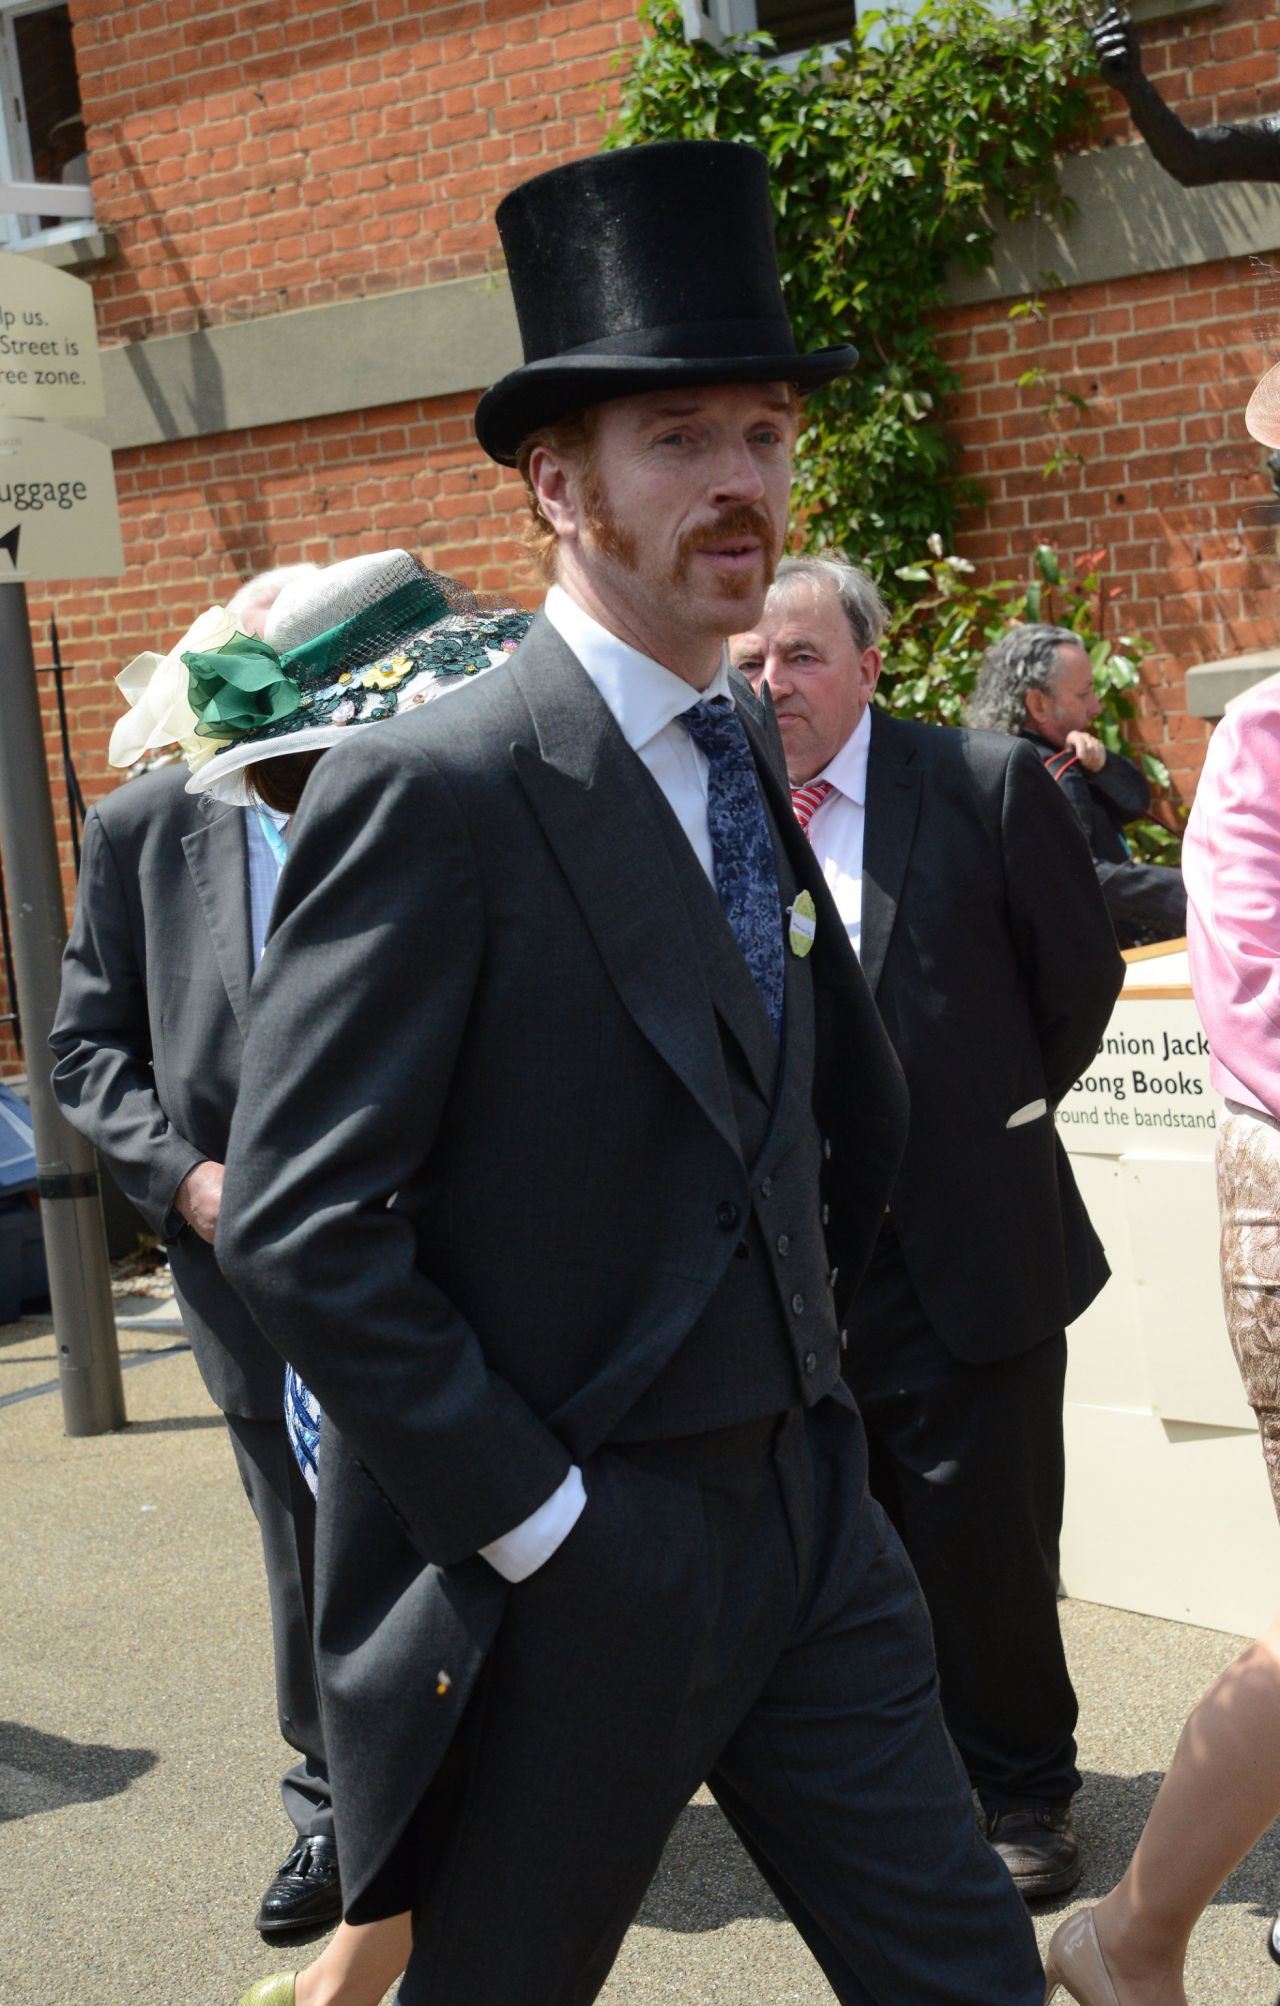 Hollywood actor Damian Lewis adopted the gentlemen's dress code of top hat and tails as he paid a visit to Royal Ascot in 2015.